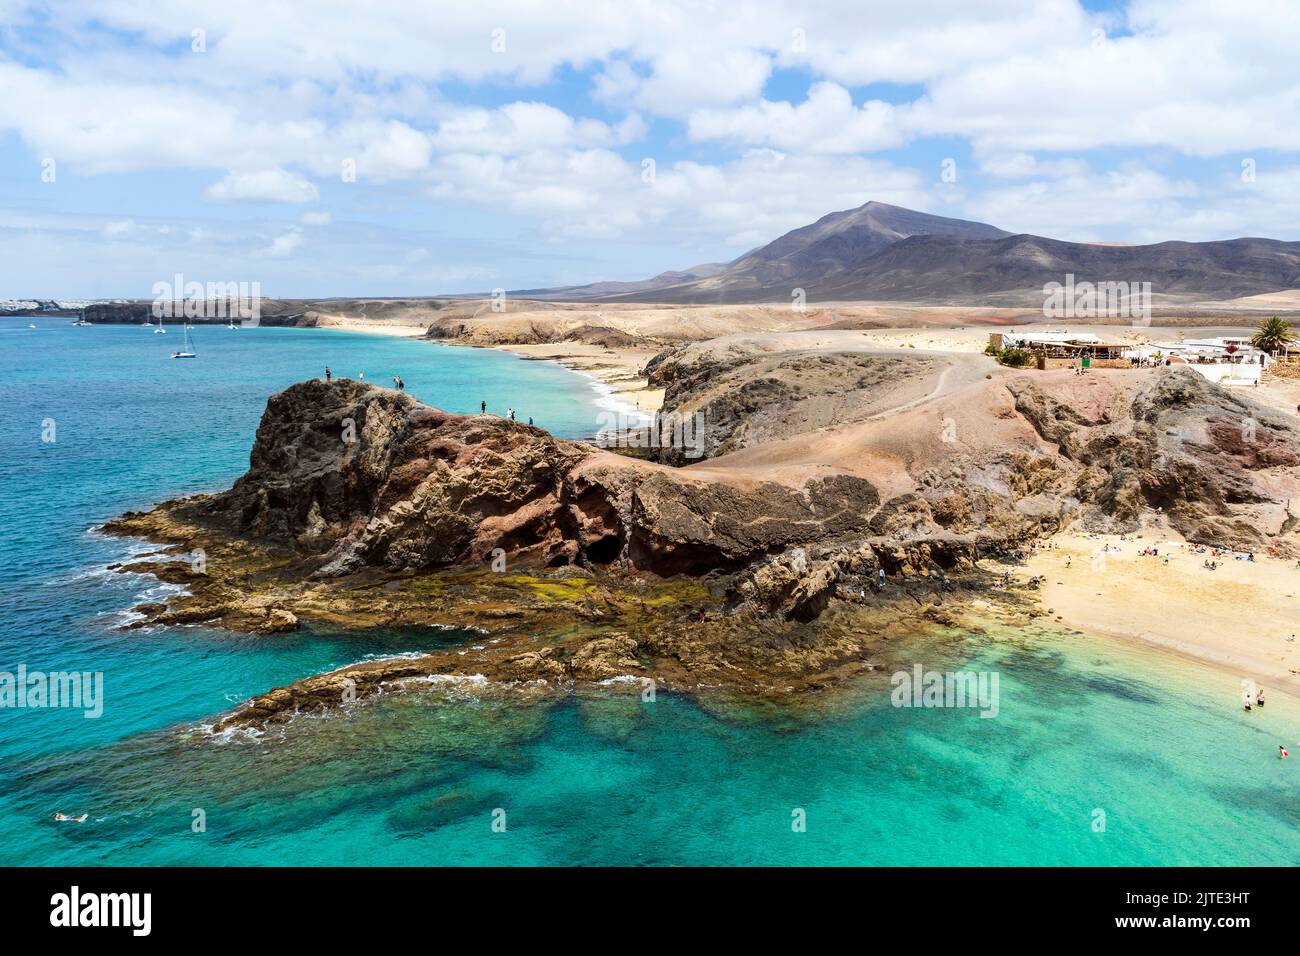 White sand and volcanic rocks at Papagayo Beach located on south end of Lanzarote, Canary Islands, Spain Stock Photo